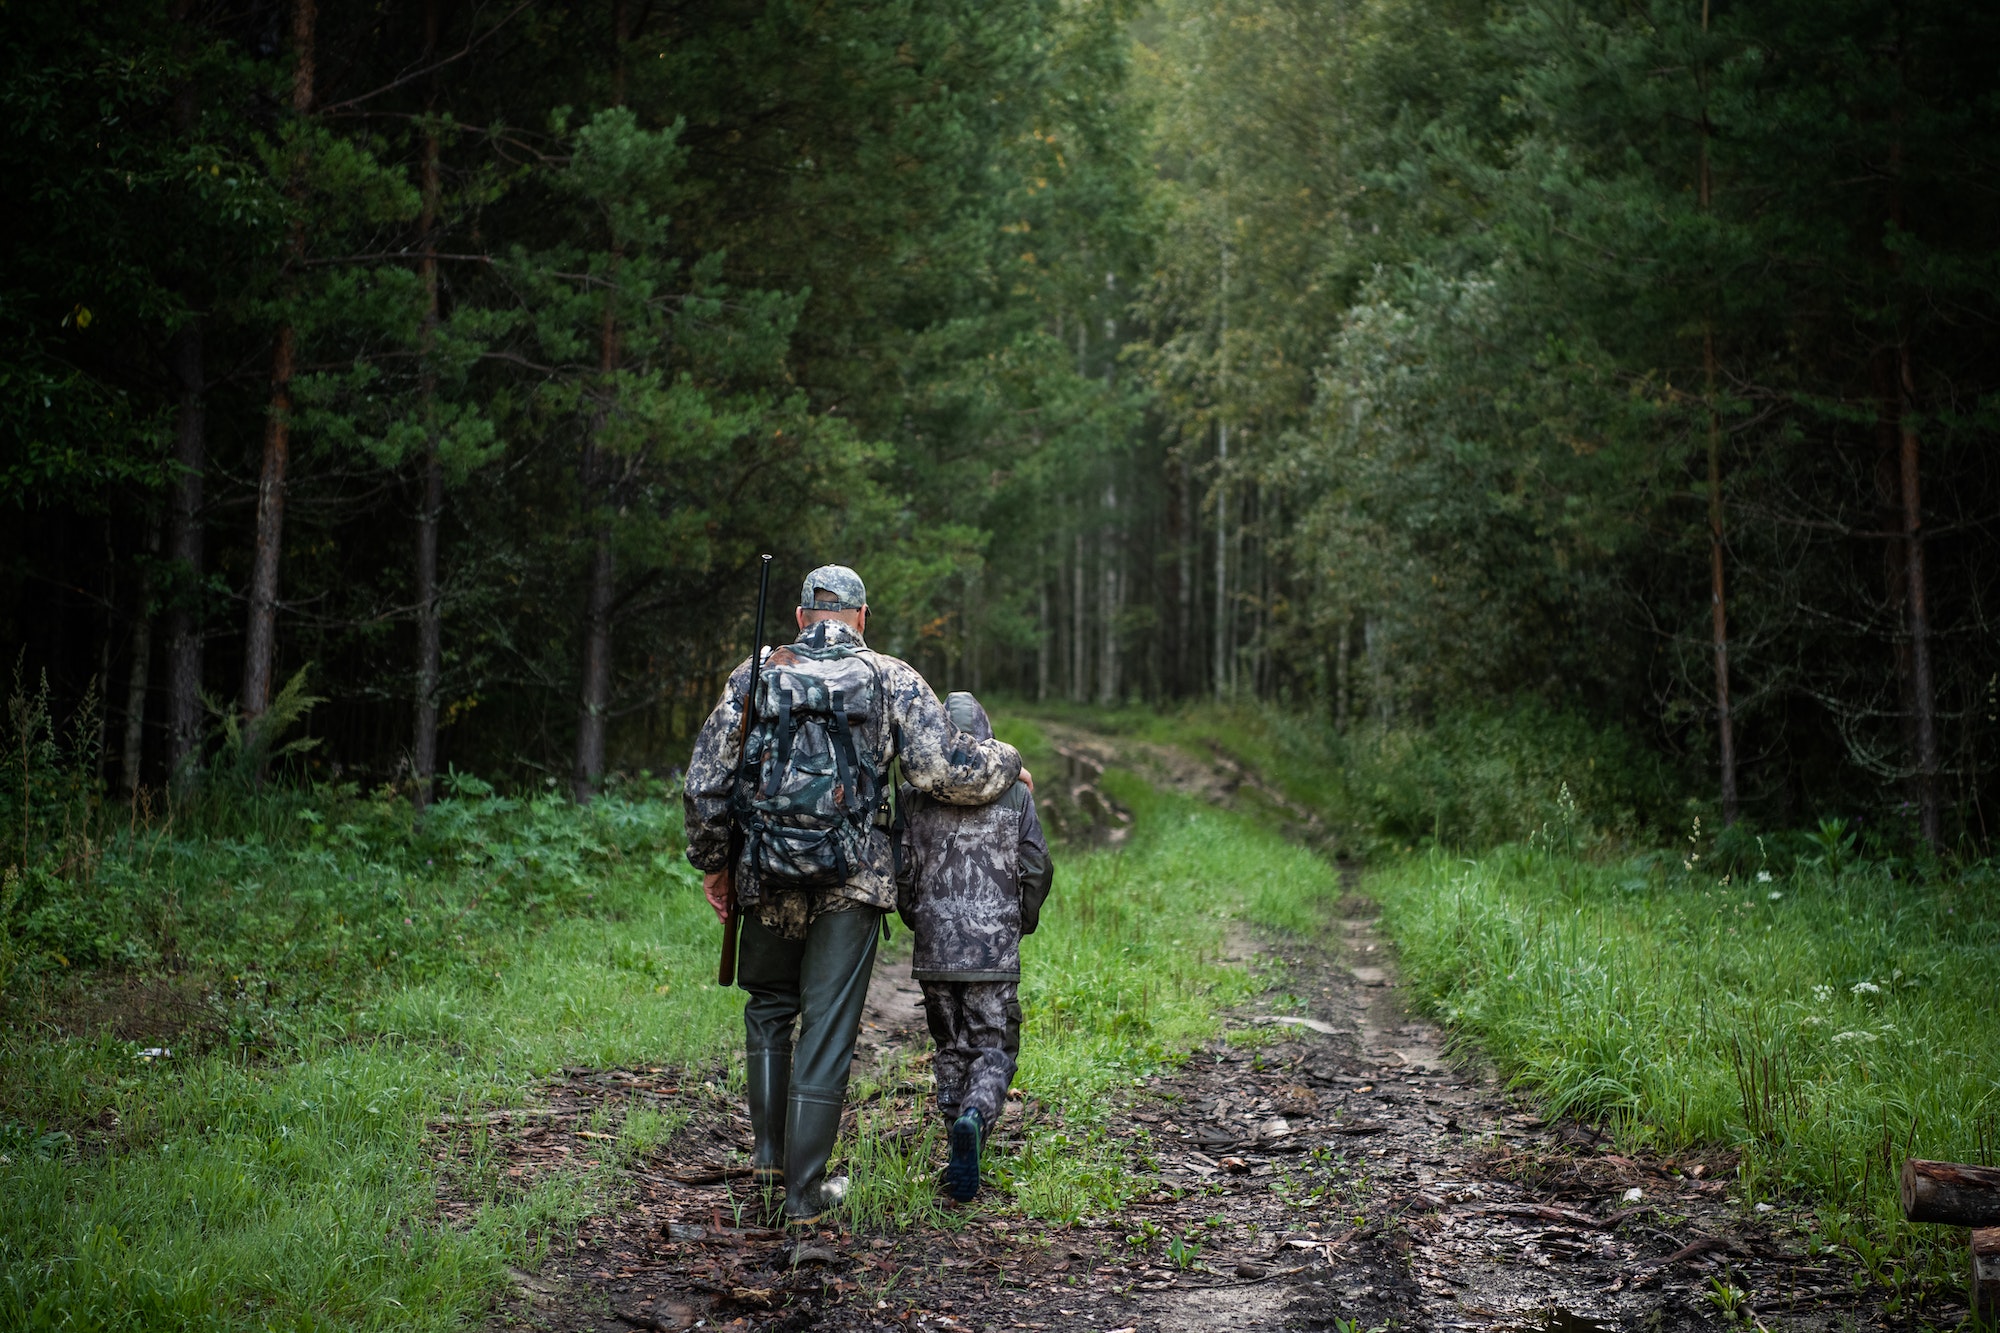 Hunters with hunting equipment going away through rural forest at sunrise during hunting season in